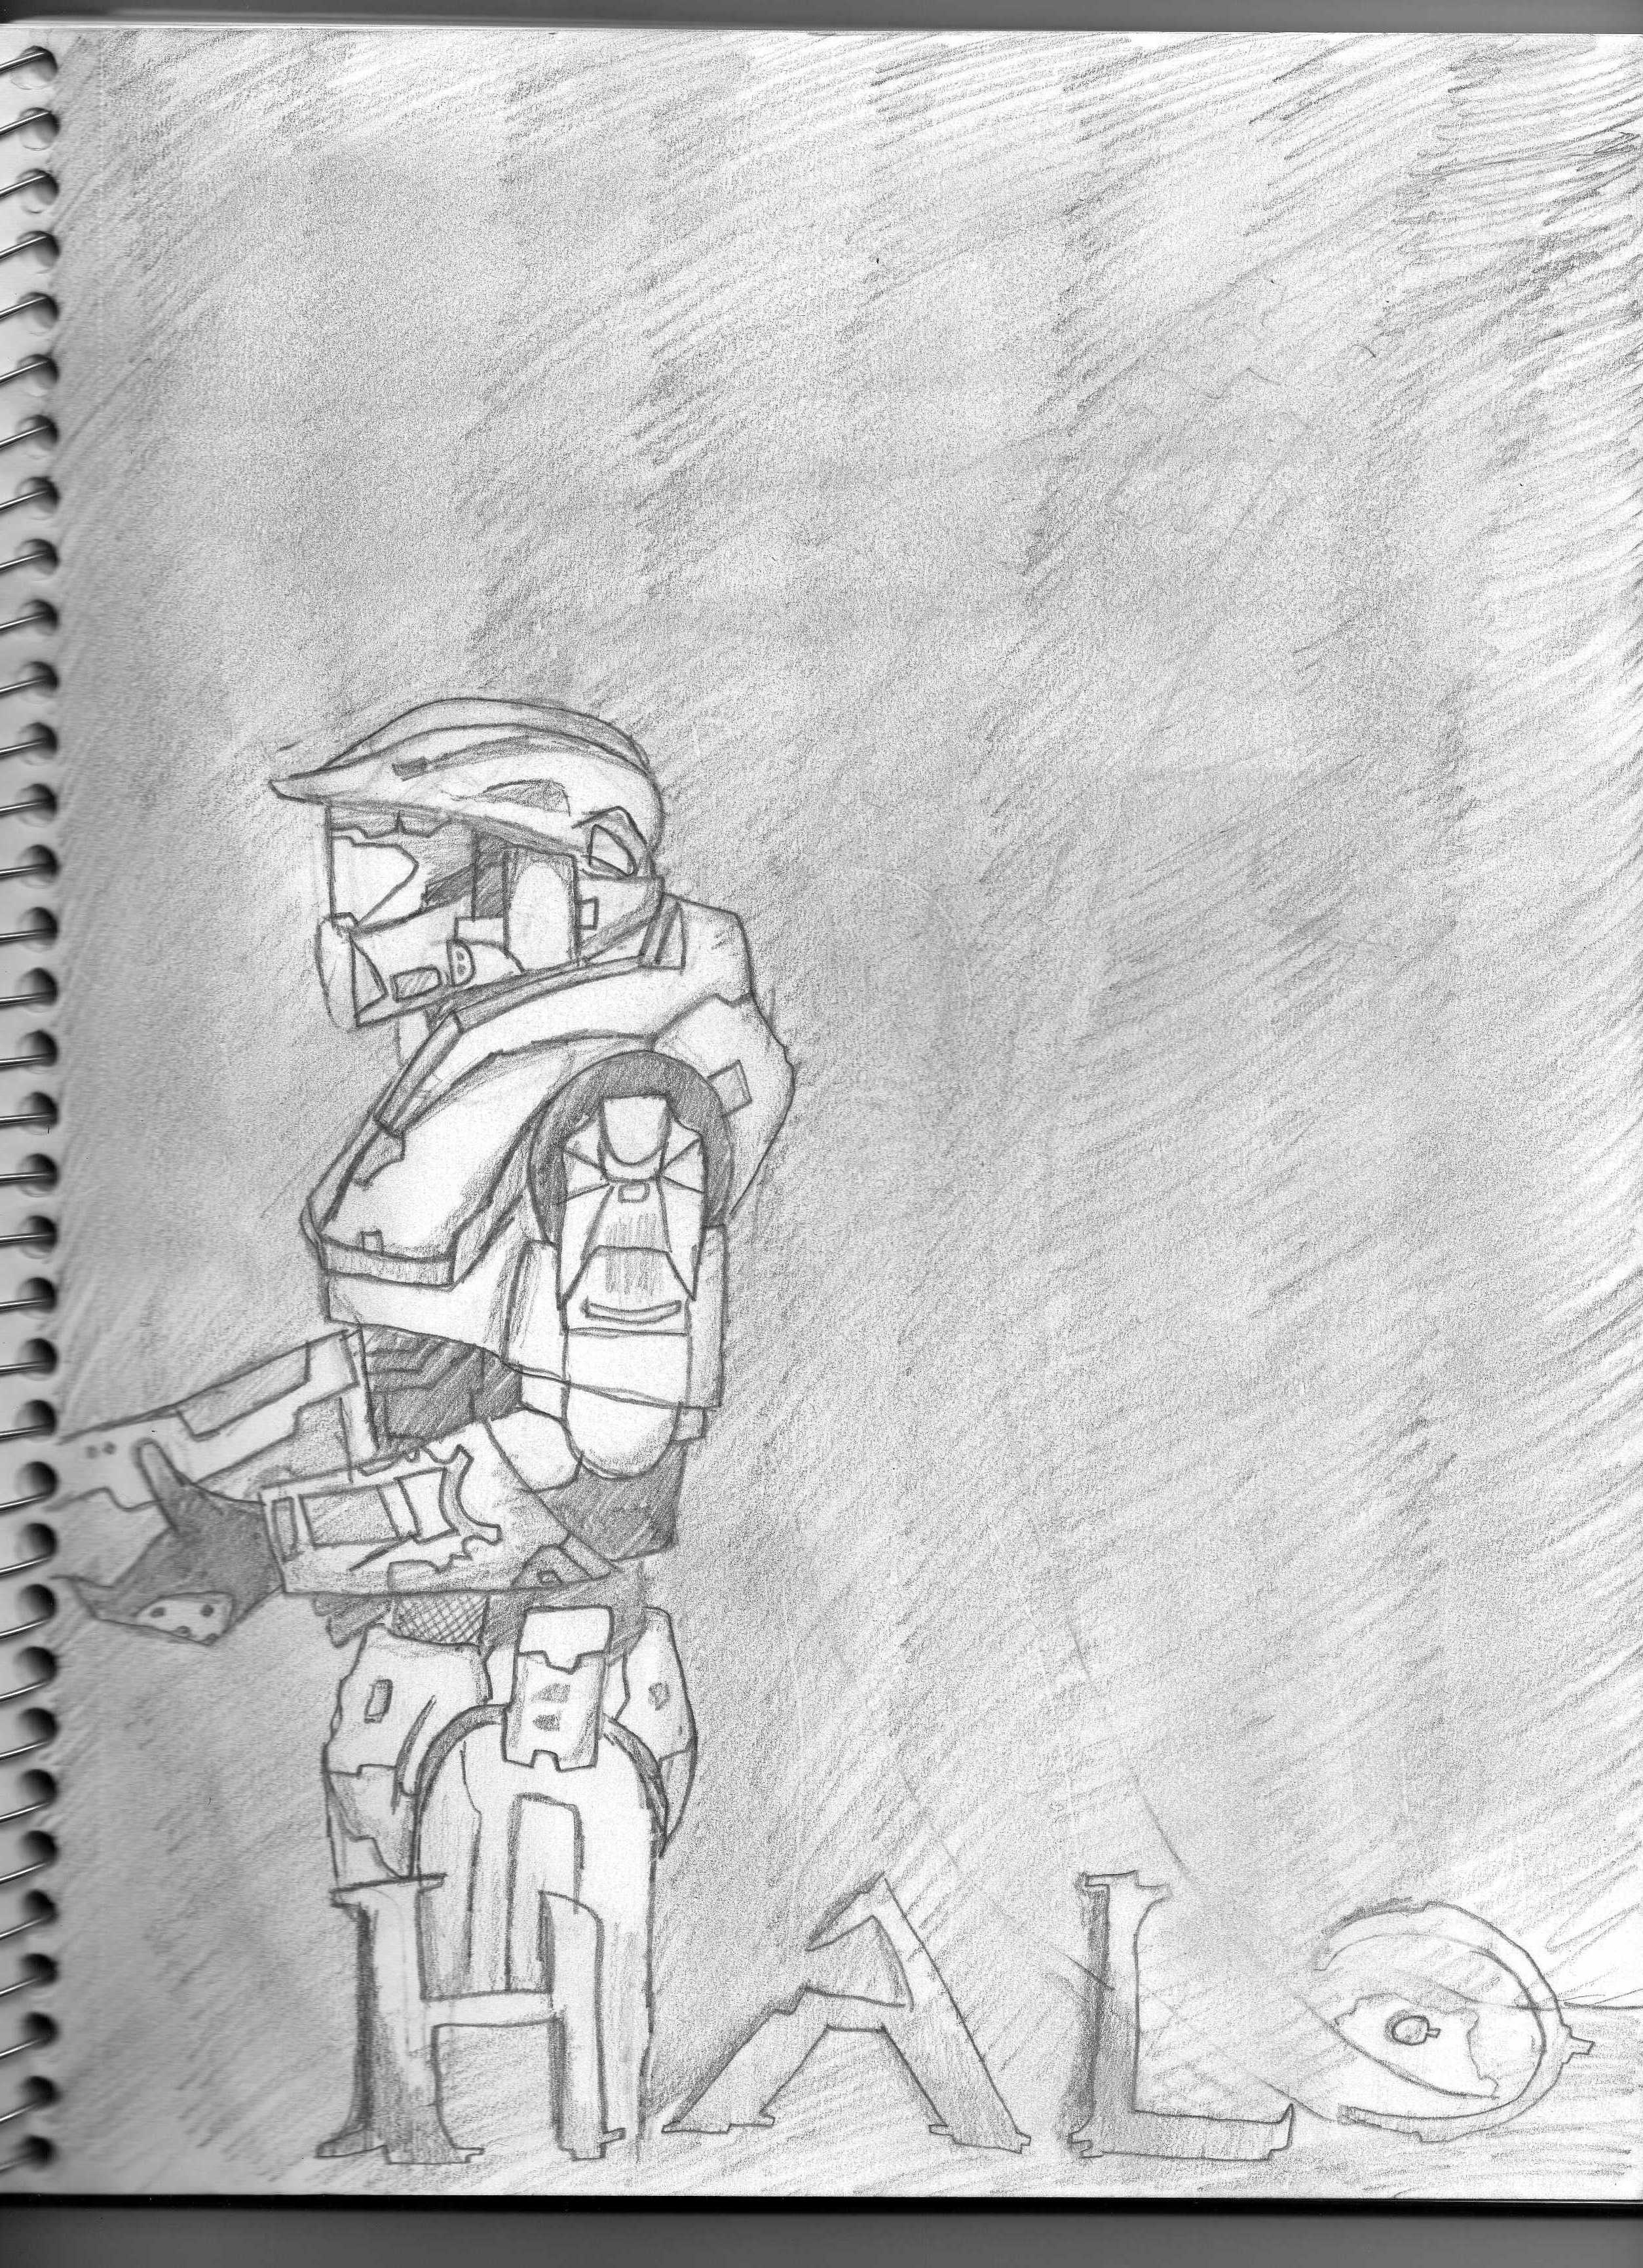 THE MaStEr ChIeF by halochick112